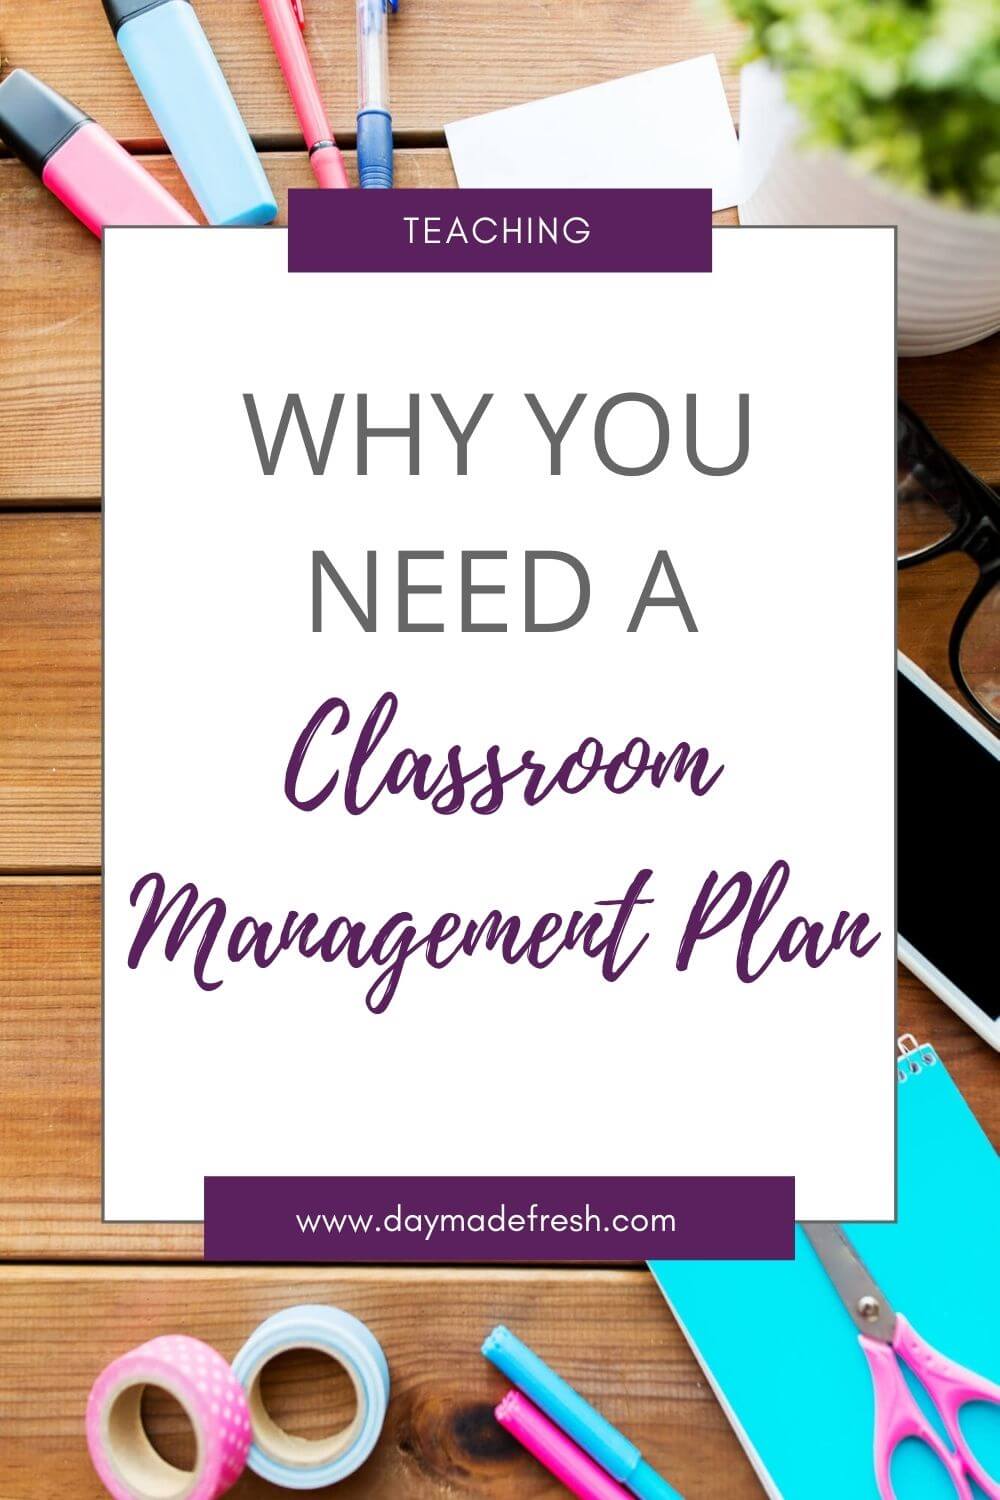  Image Text: Why you need a CLassroom Management Plan; Wooden desk with white overlay